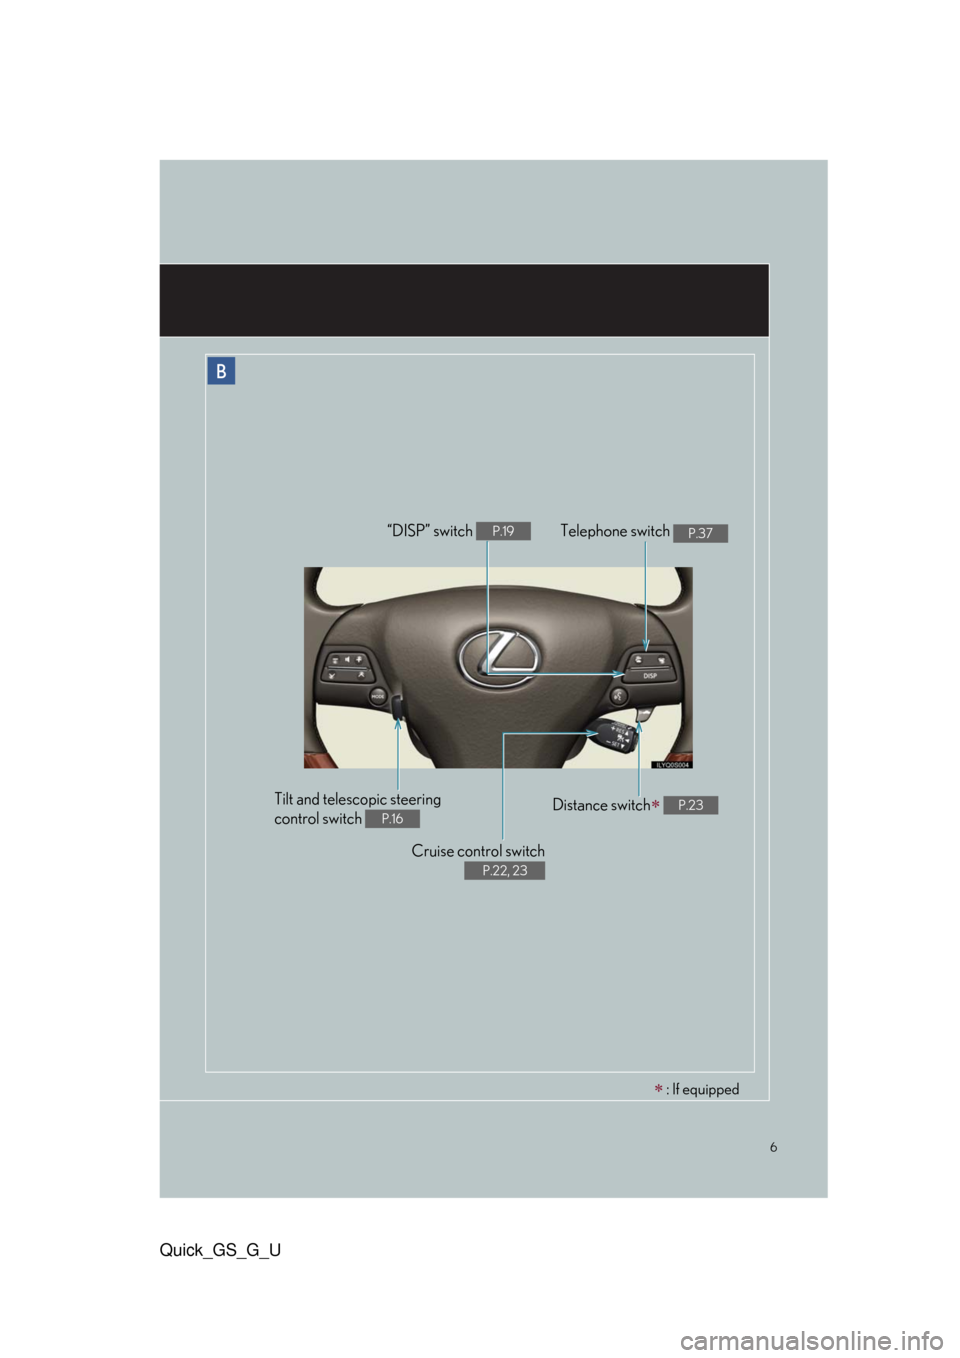 Lexus GS350 2010  Do-It-Yourself Maintenance / LEXUS 2010 GS460/350 QUICK GUIDE OWNERS MANUAL (OM30B76U) 6
Quick_GS_G_U
B
Cruise control switch
 
P.22, 23
Telephone switch P.37“DISP” switch P.19
Distance switch P.23Tilt and telescopic steering 
control switch 
P.16
 : If equipped 